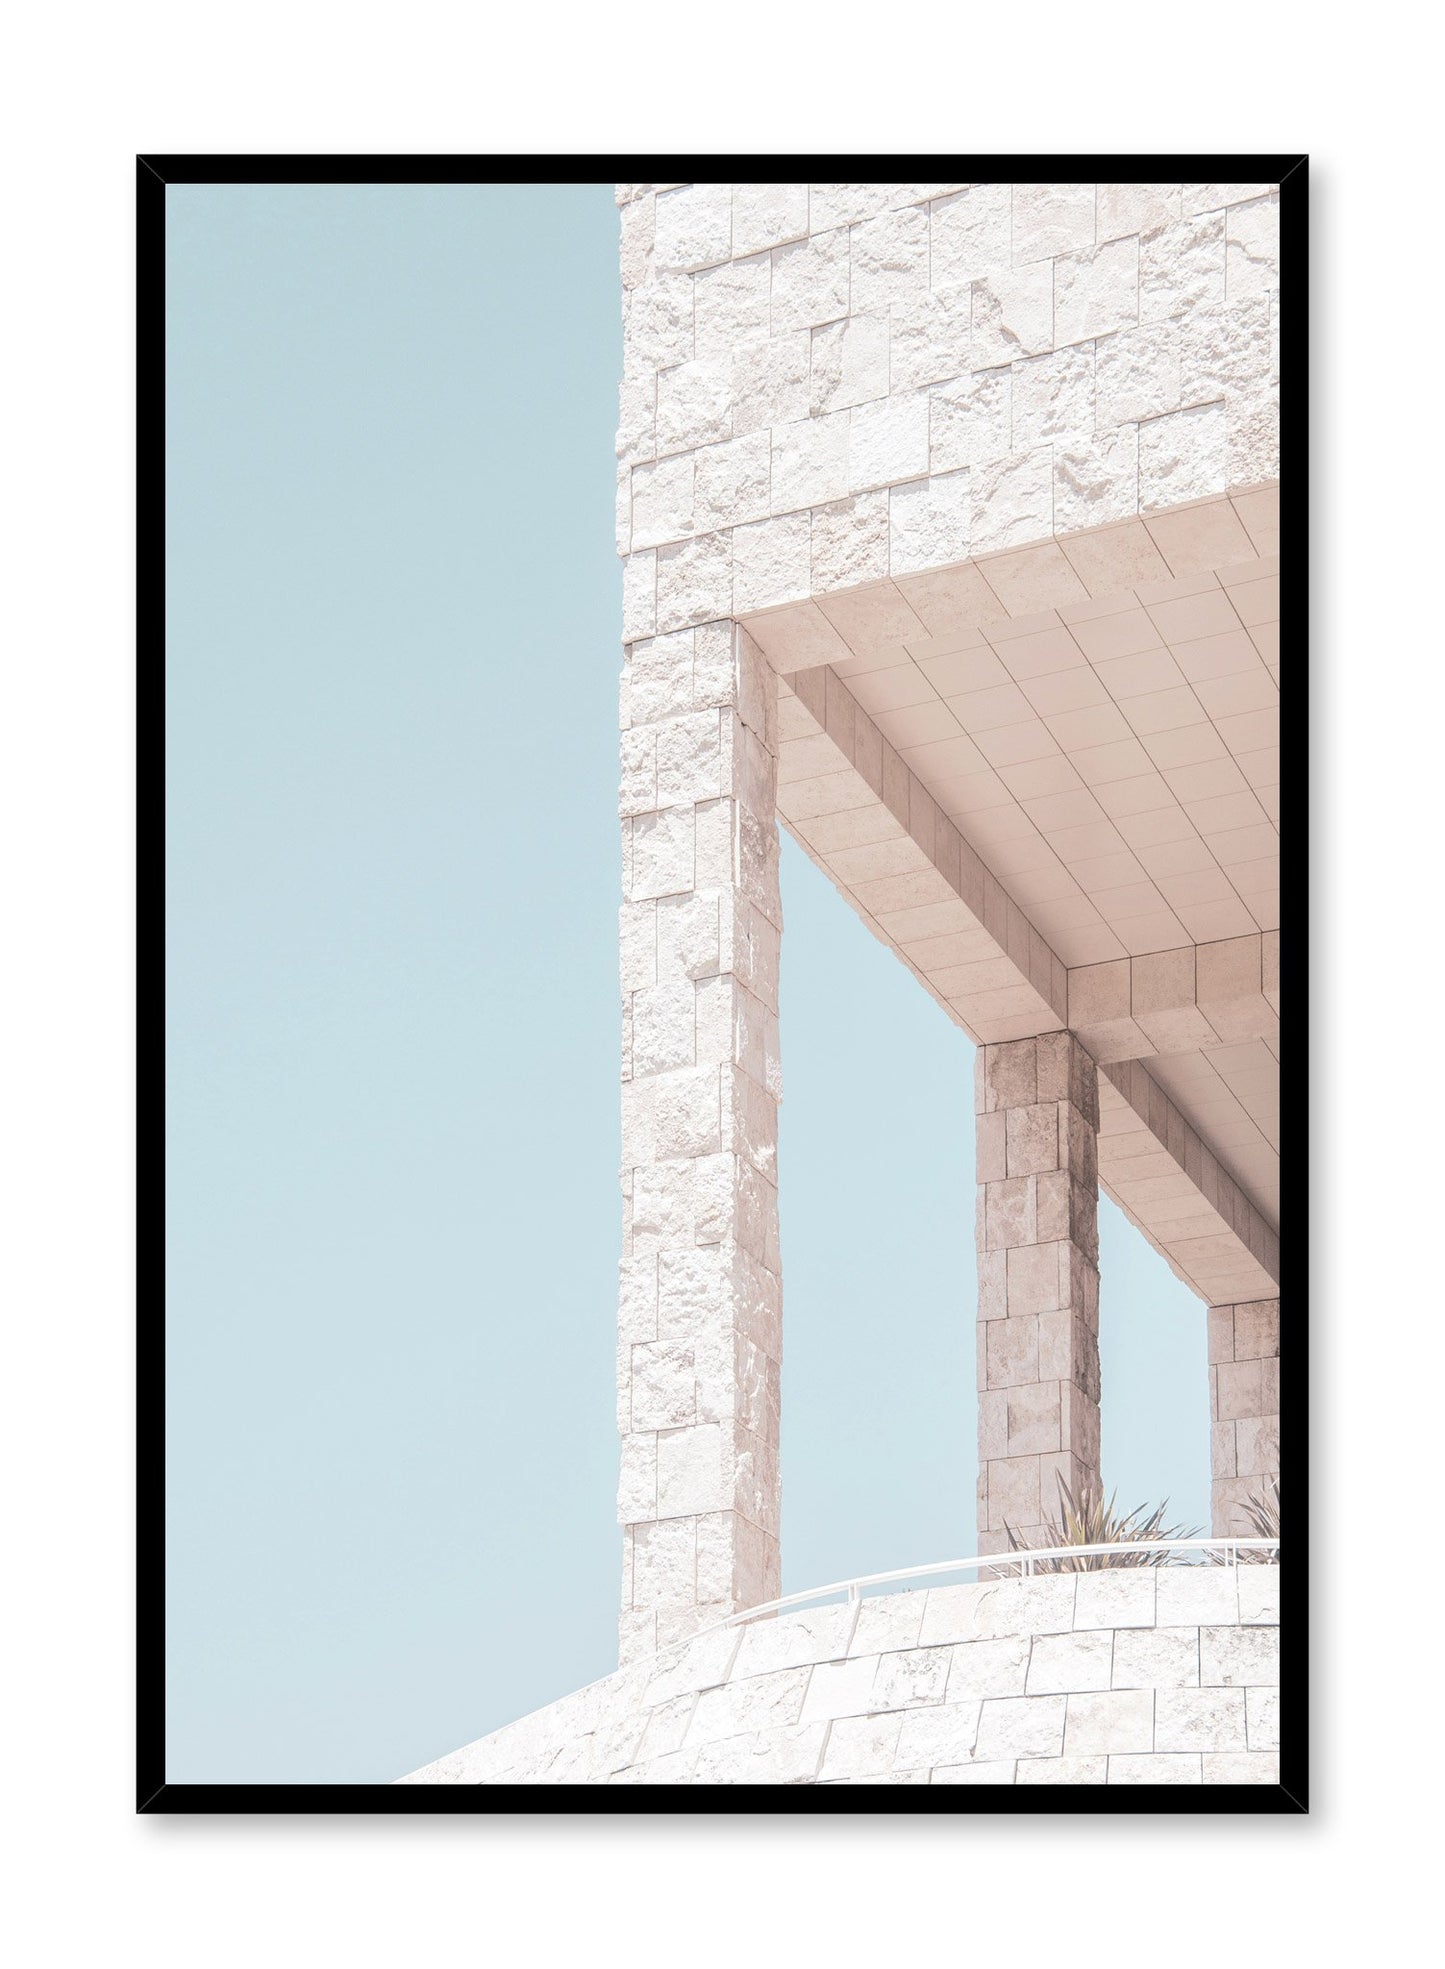 Modern minimalist poster by Opposite Wall with photography of beige bricks and columns